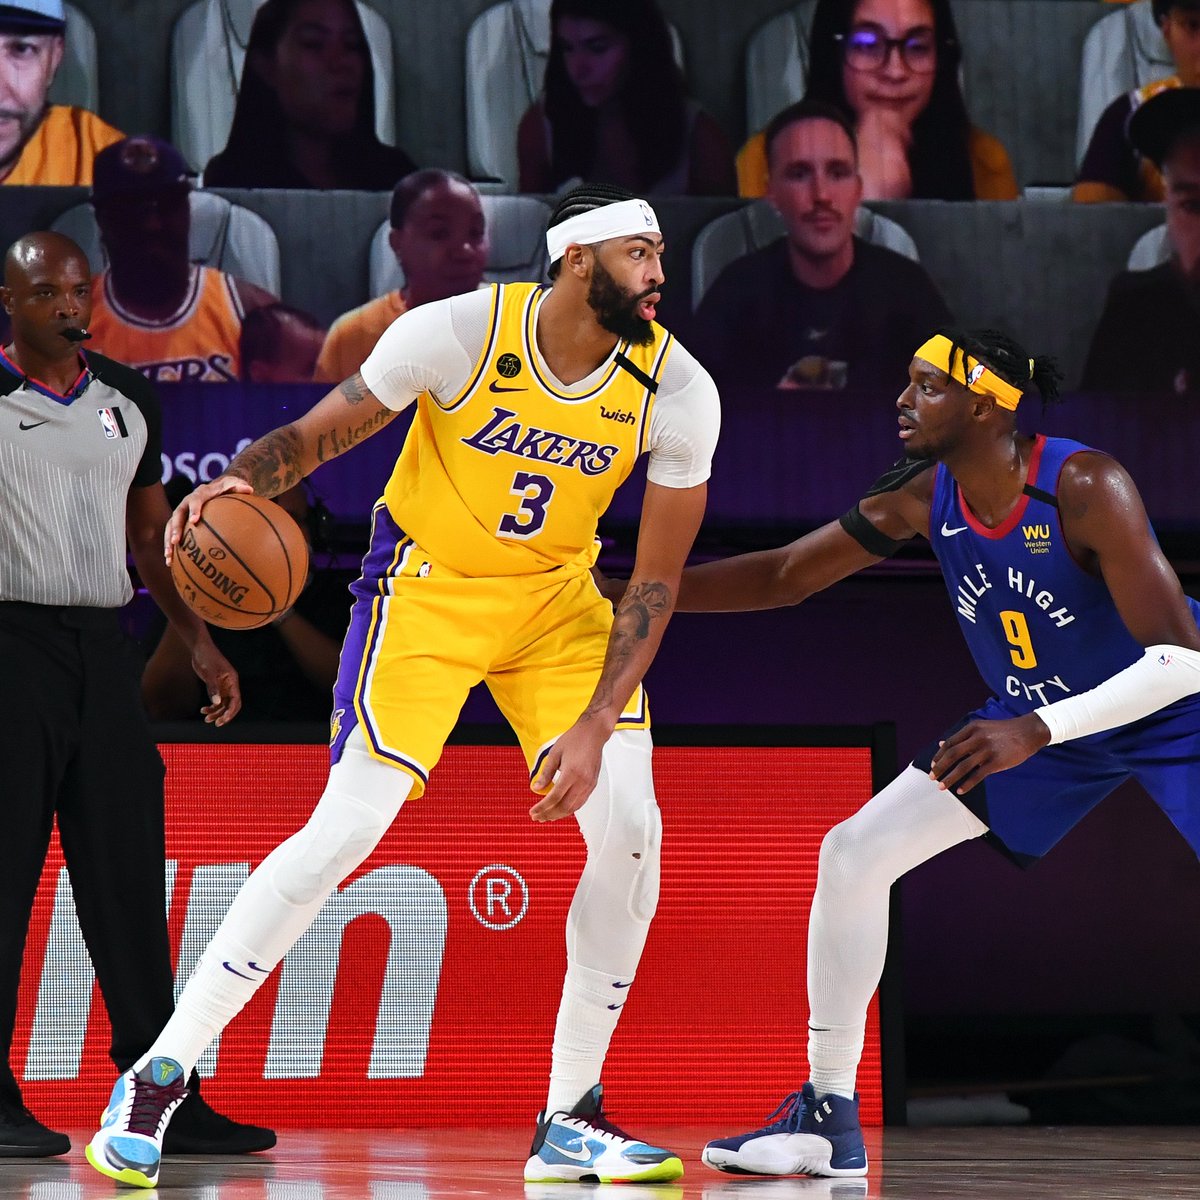 Nba On Twitter Halftime In Game 1 On Tnt Nuggets 59 Lakers 70 Anthony Davis 17 Pts 5 Reb Lebron James 15 Pts 4 Reb 5 Ast Jamal Murray 15 Pts 4 Ast Nikola Jokic 11 Pts 5 Reb Https T Co 7systru6mu